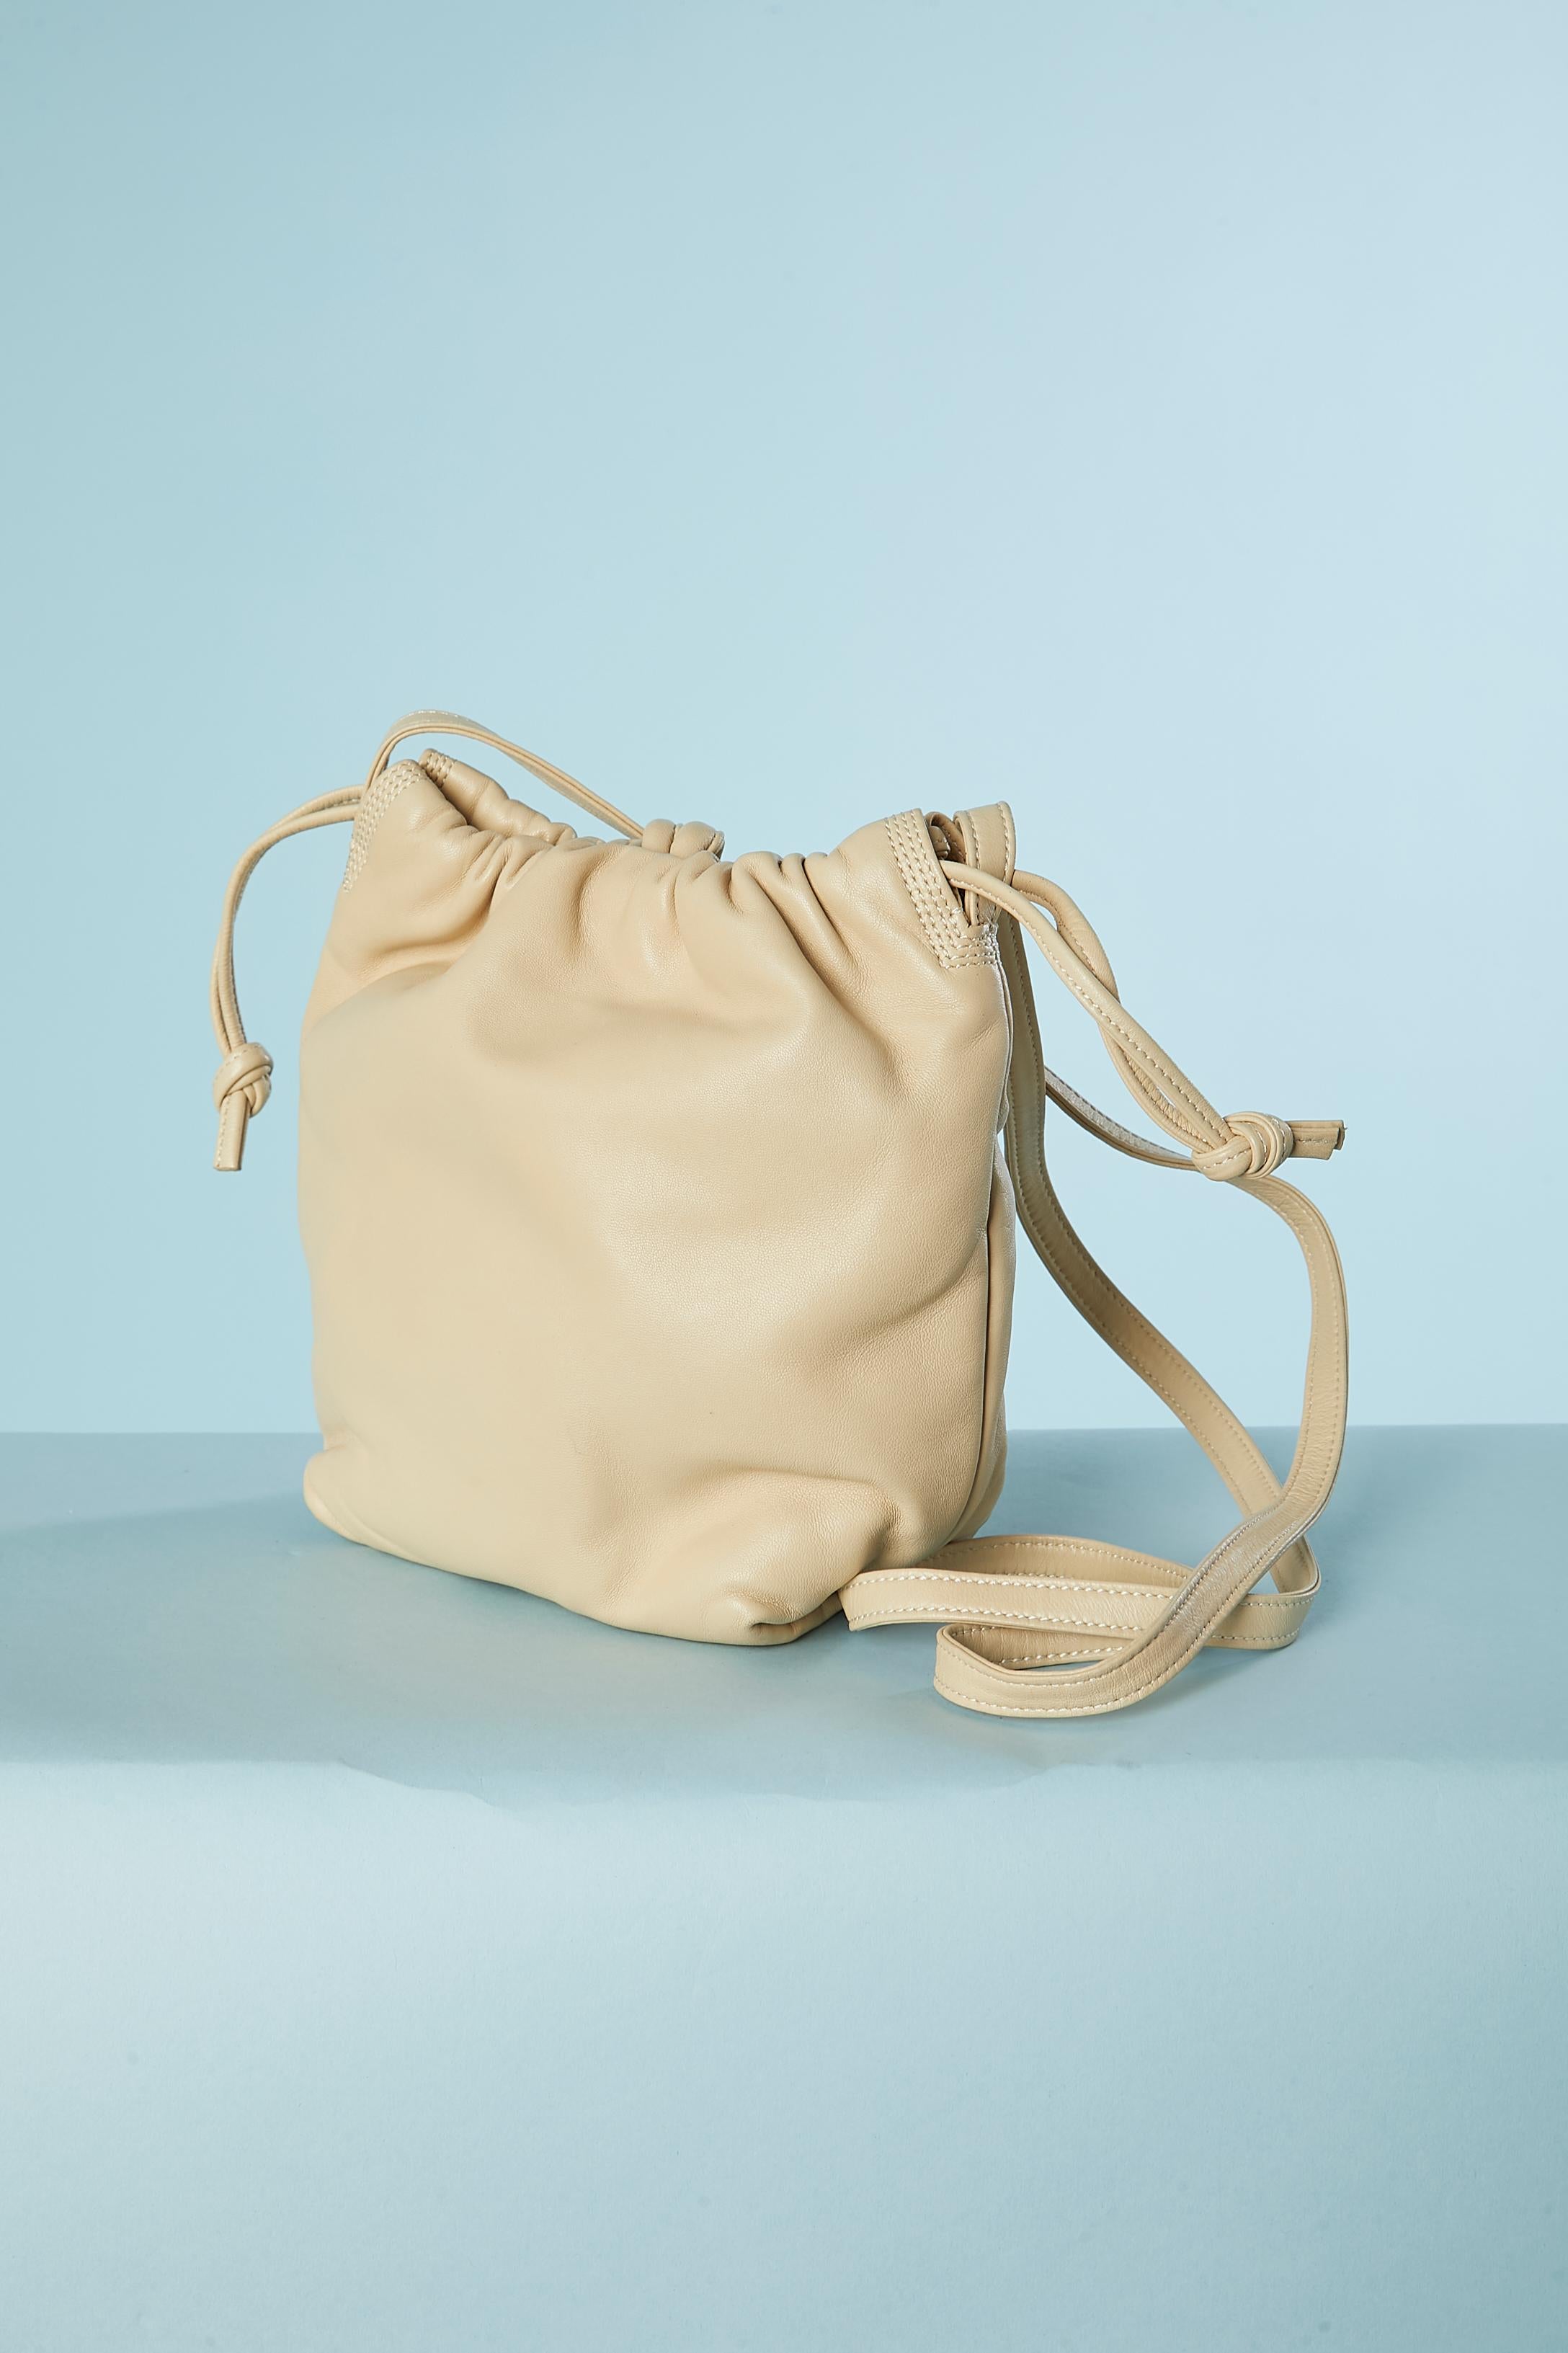 Beige leather drawstring bag. Branded nylon lining. 2 pockets inside ( One with zip, one without) Snap closure in the middle top and leather drawstring. Dust-bag provided.
SIZE 20cm X 14 cm X 10 cm 